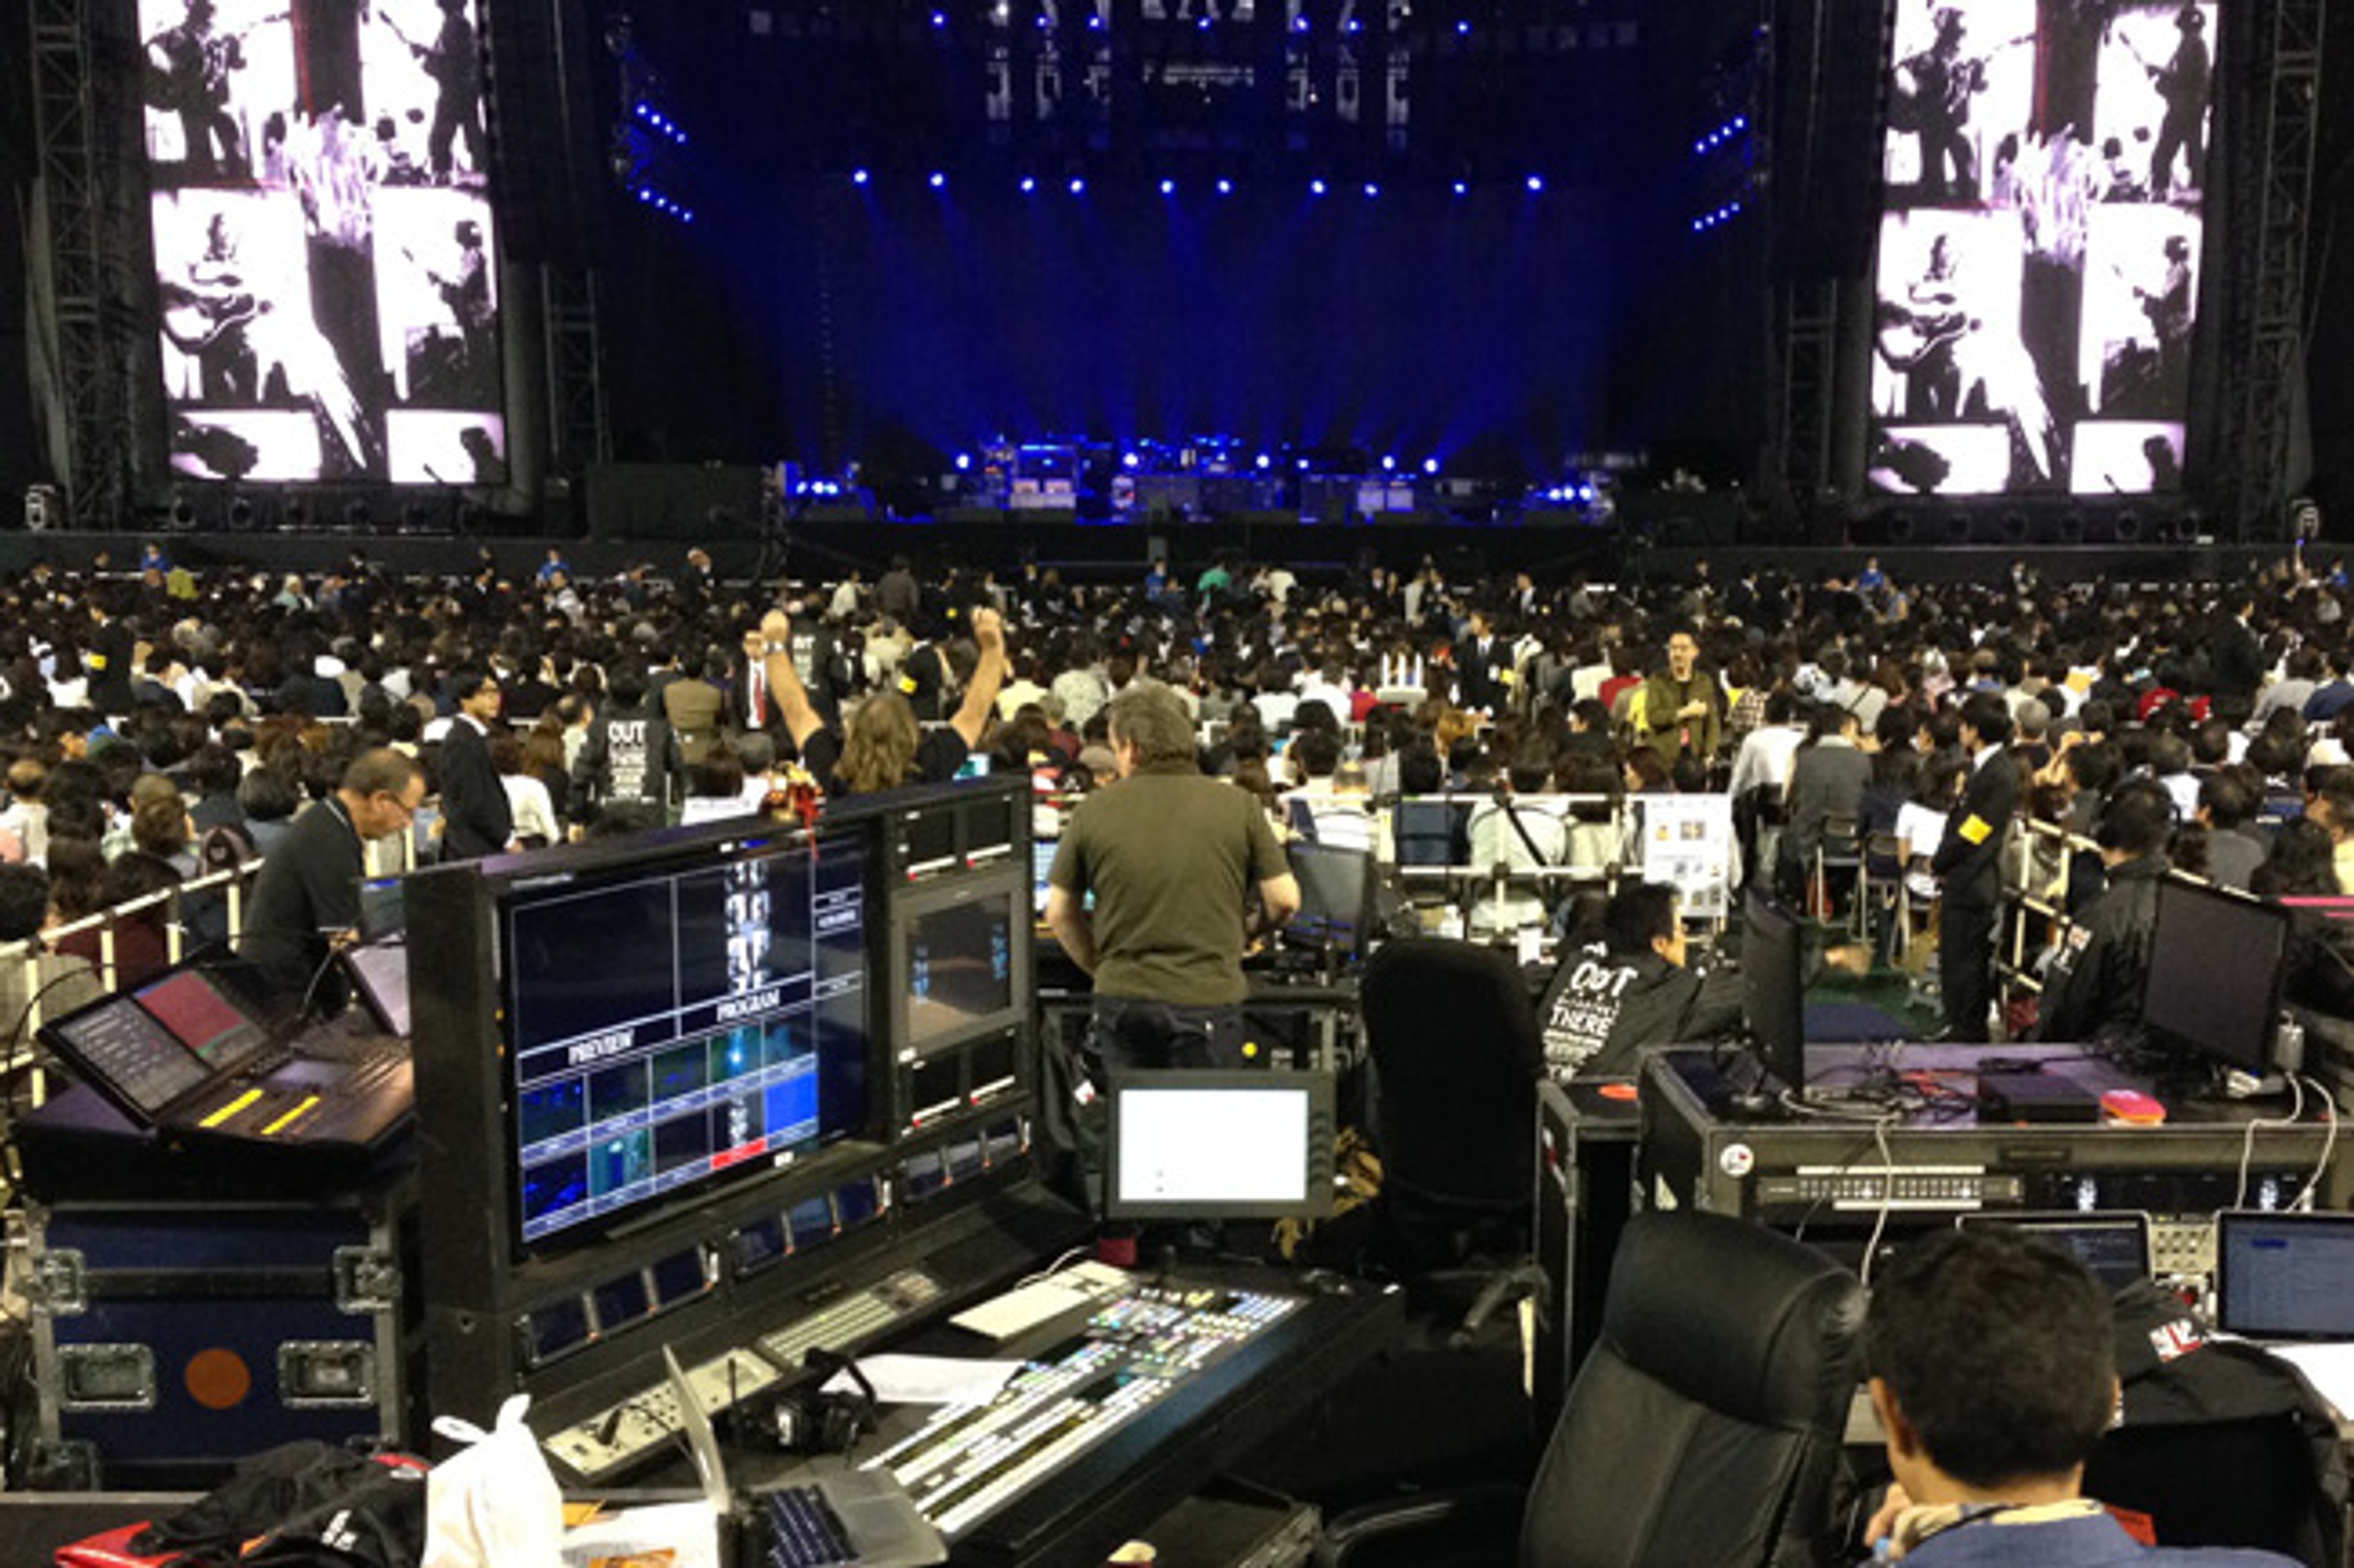 PaulMcCartney.com gets #OutThere in Japan